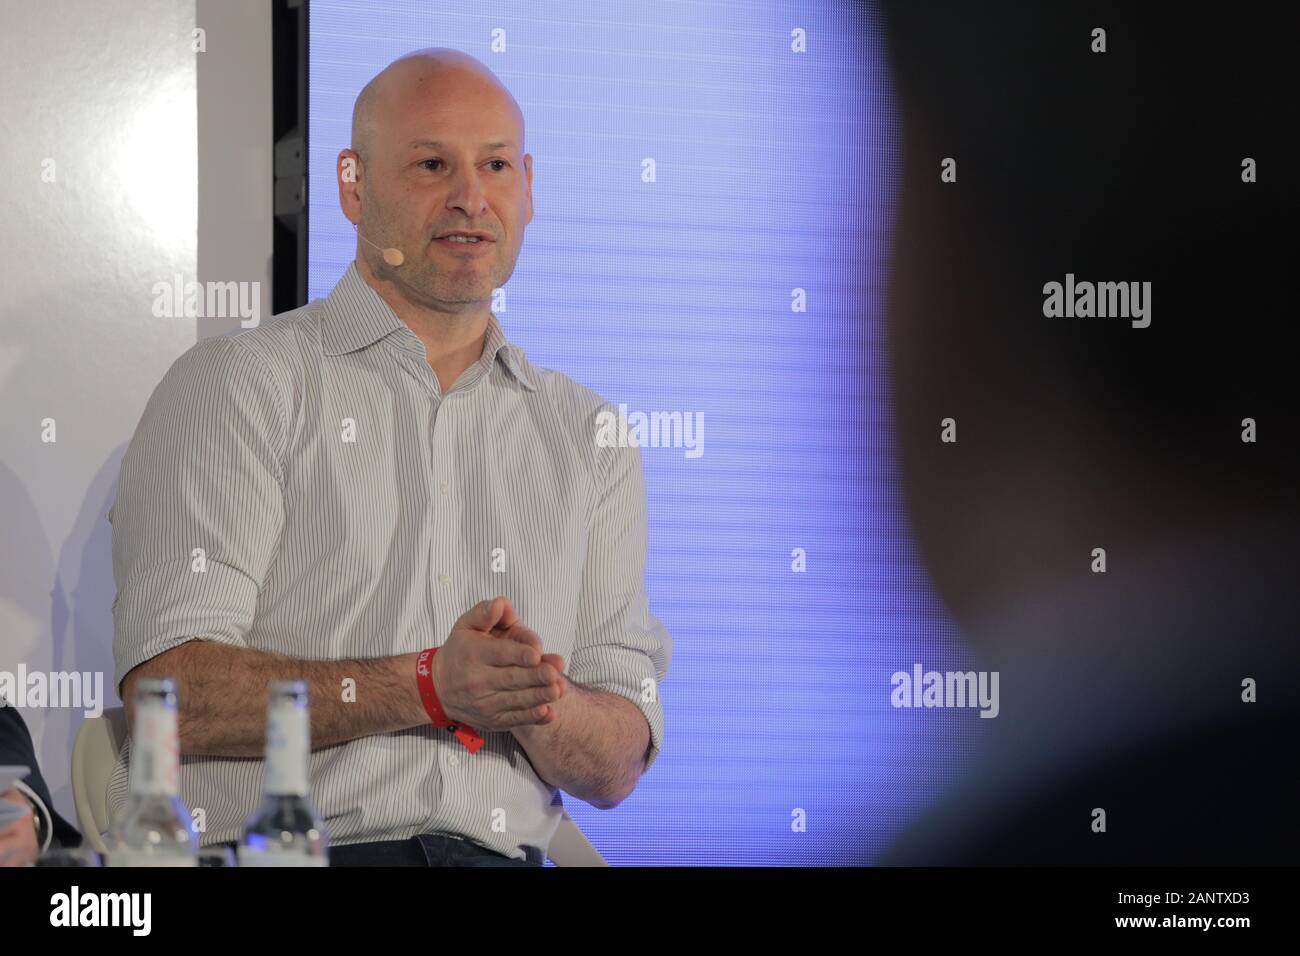 Munich, Germany. 19th Jan, 2020. Joe Lubin (Founder ConsenSys) speaks during a panel at DLD Munich Conference 2020, Europe's big innovation conference, Alte Kongresshalle, Munich, January 18-20, 2020 Picture Alliance for DLD/Hubert Burda Media | usage worldwide Credit: dpa/Alamy Live News Stock Photo